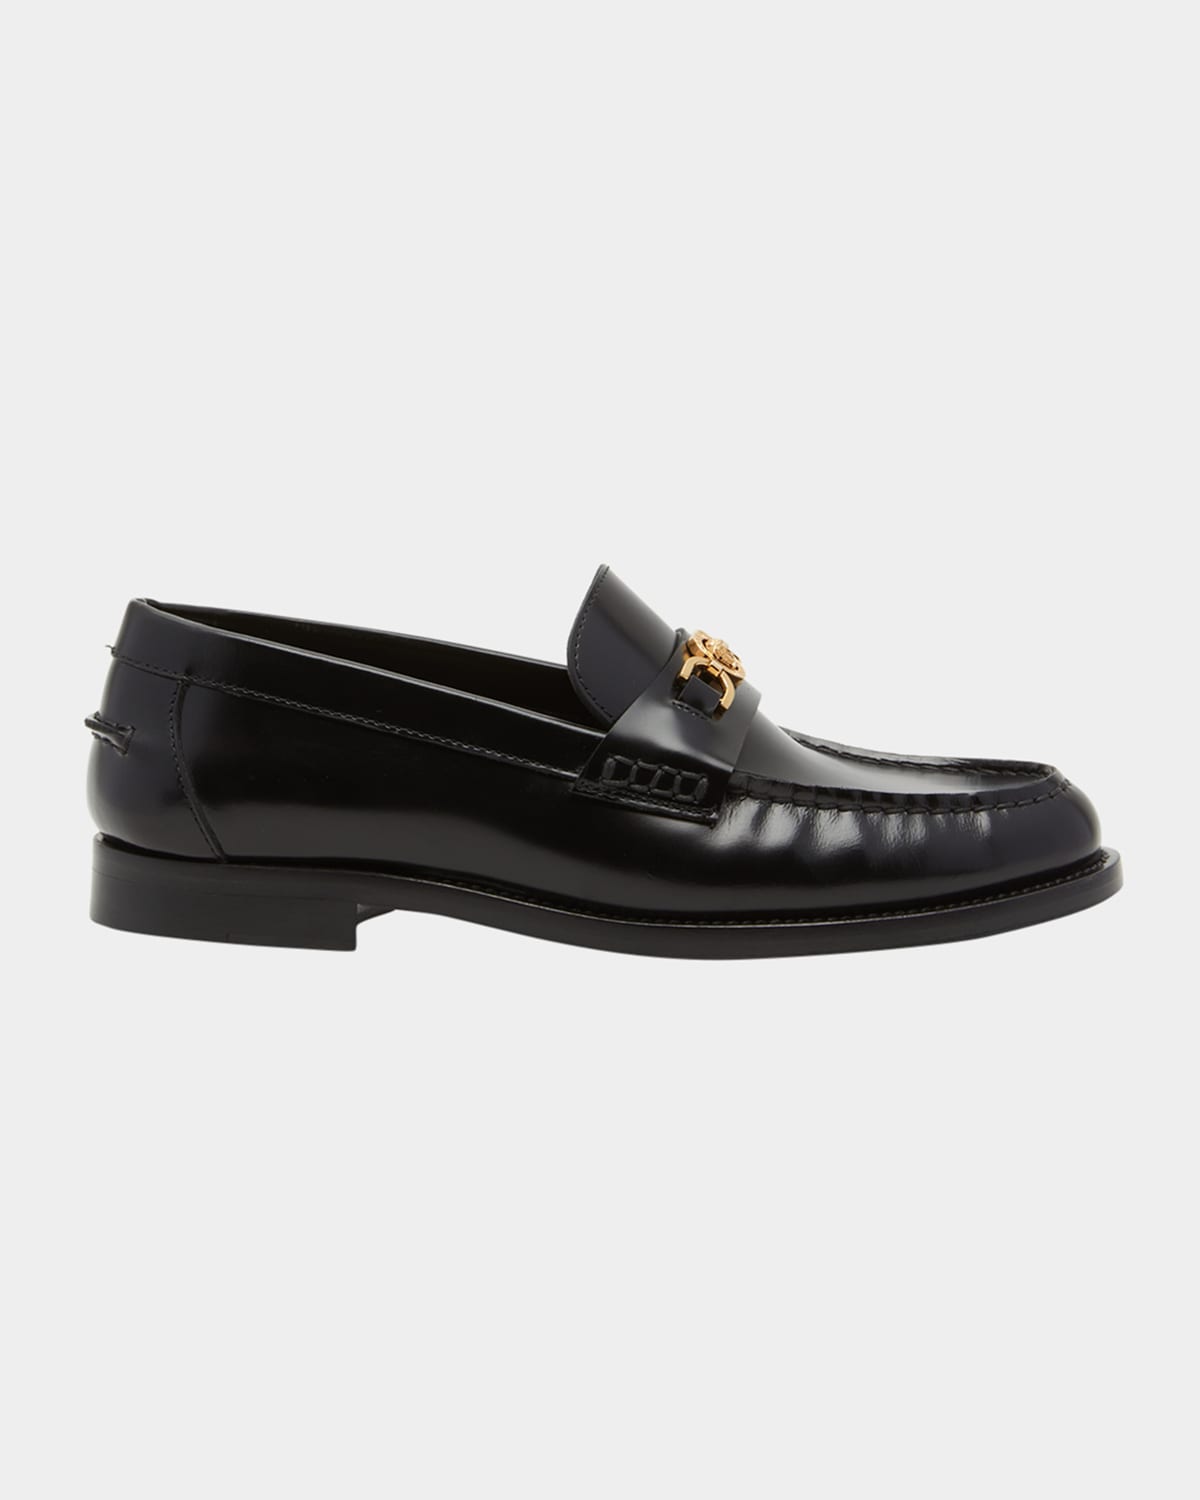 Medusa Chain Leather Loafers